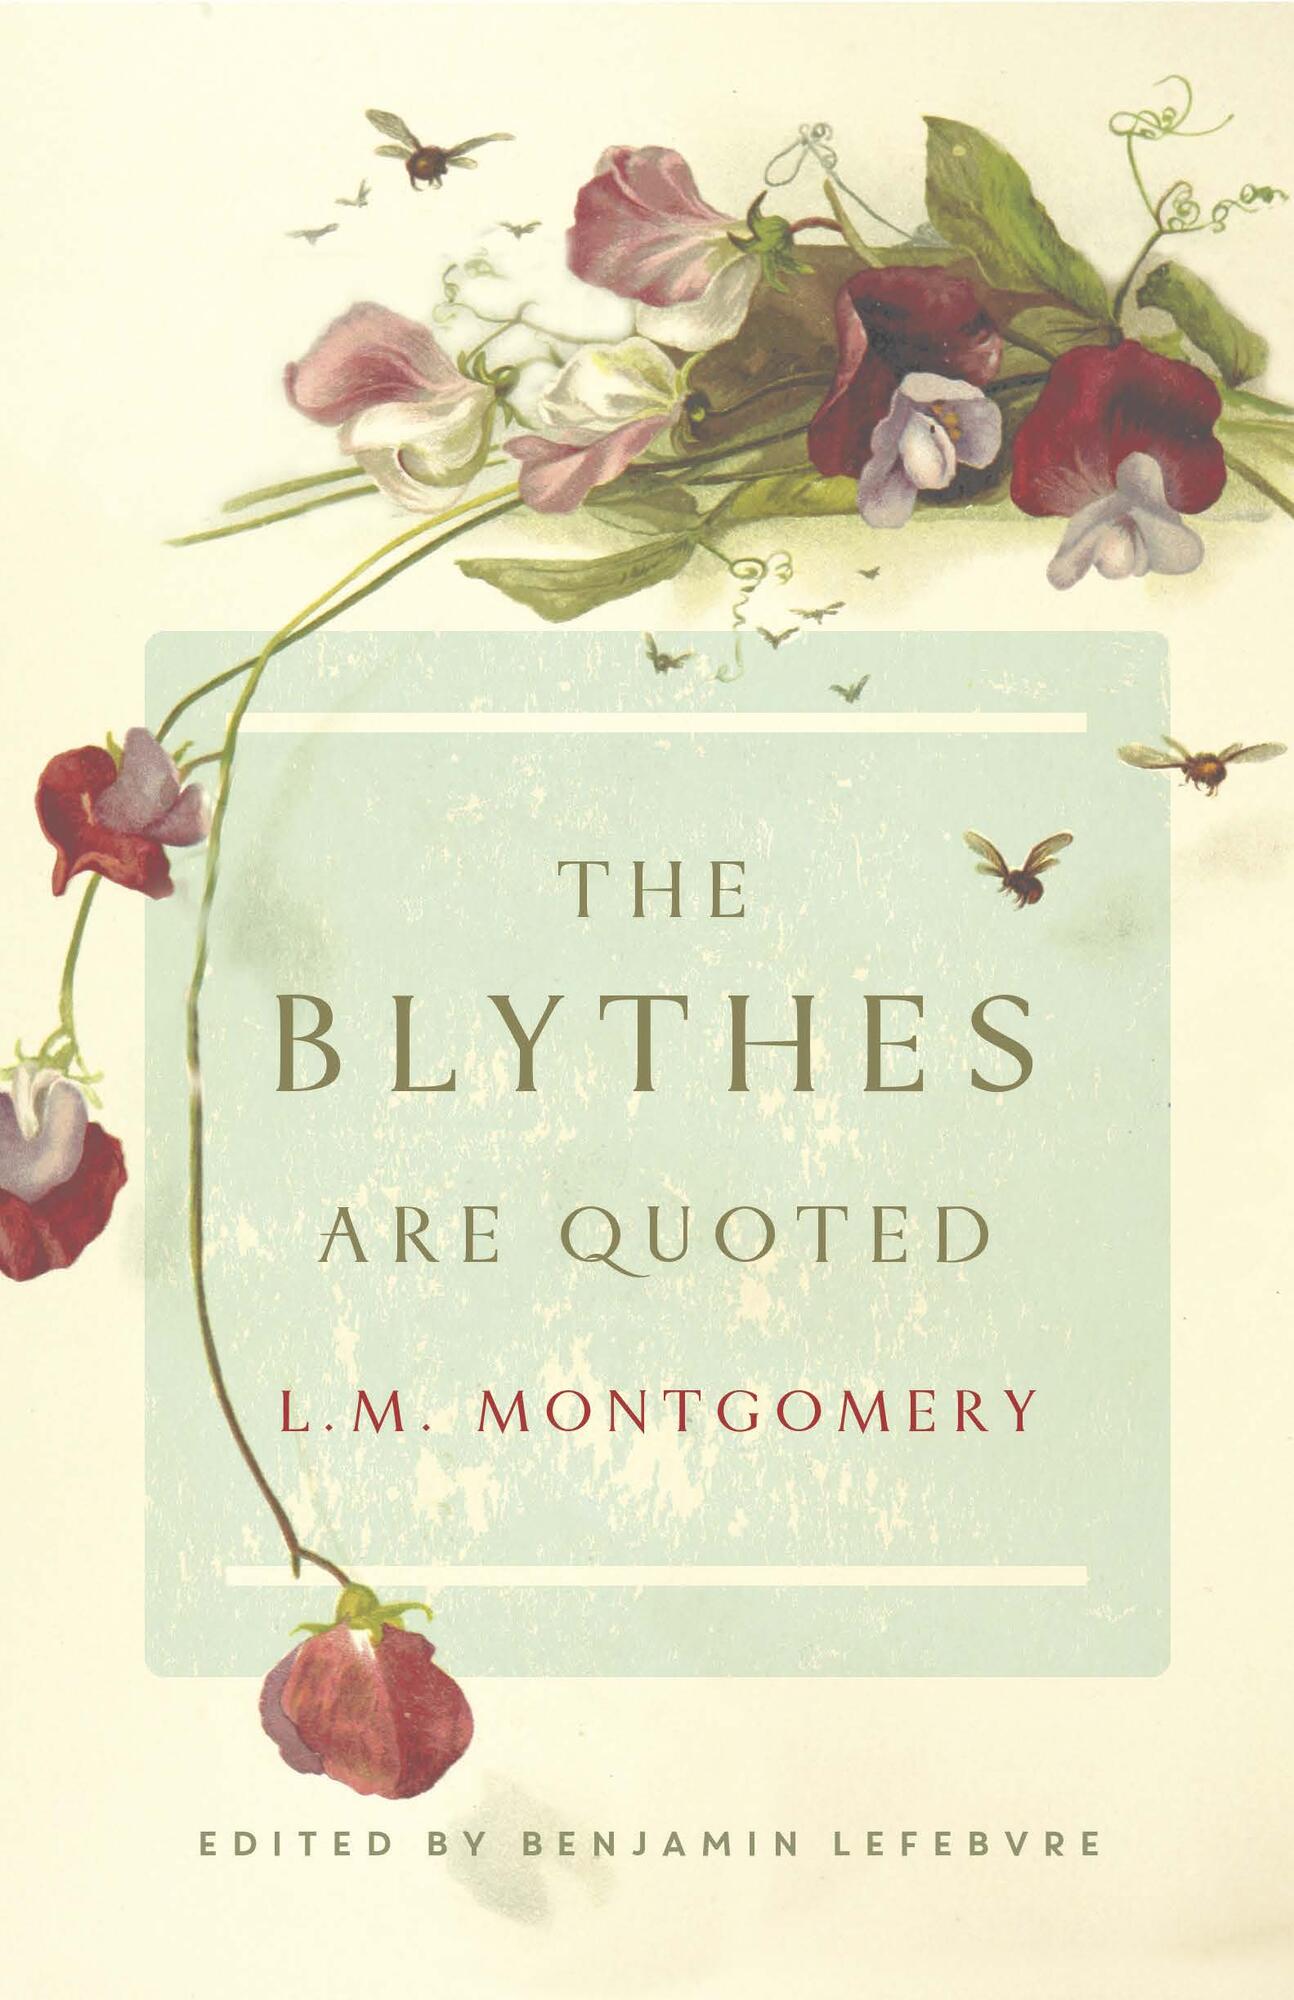 Cover of The Blythes Are Quoted, by L.M. Montgomery